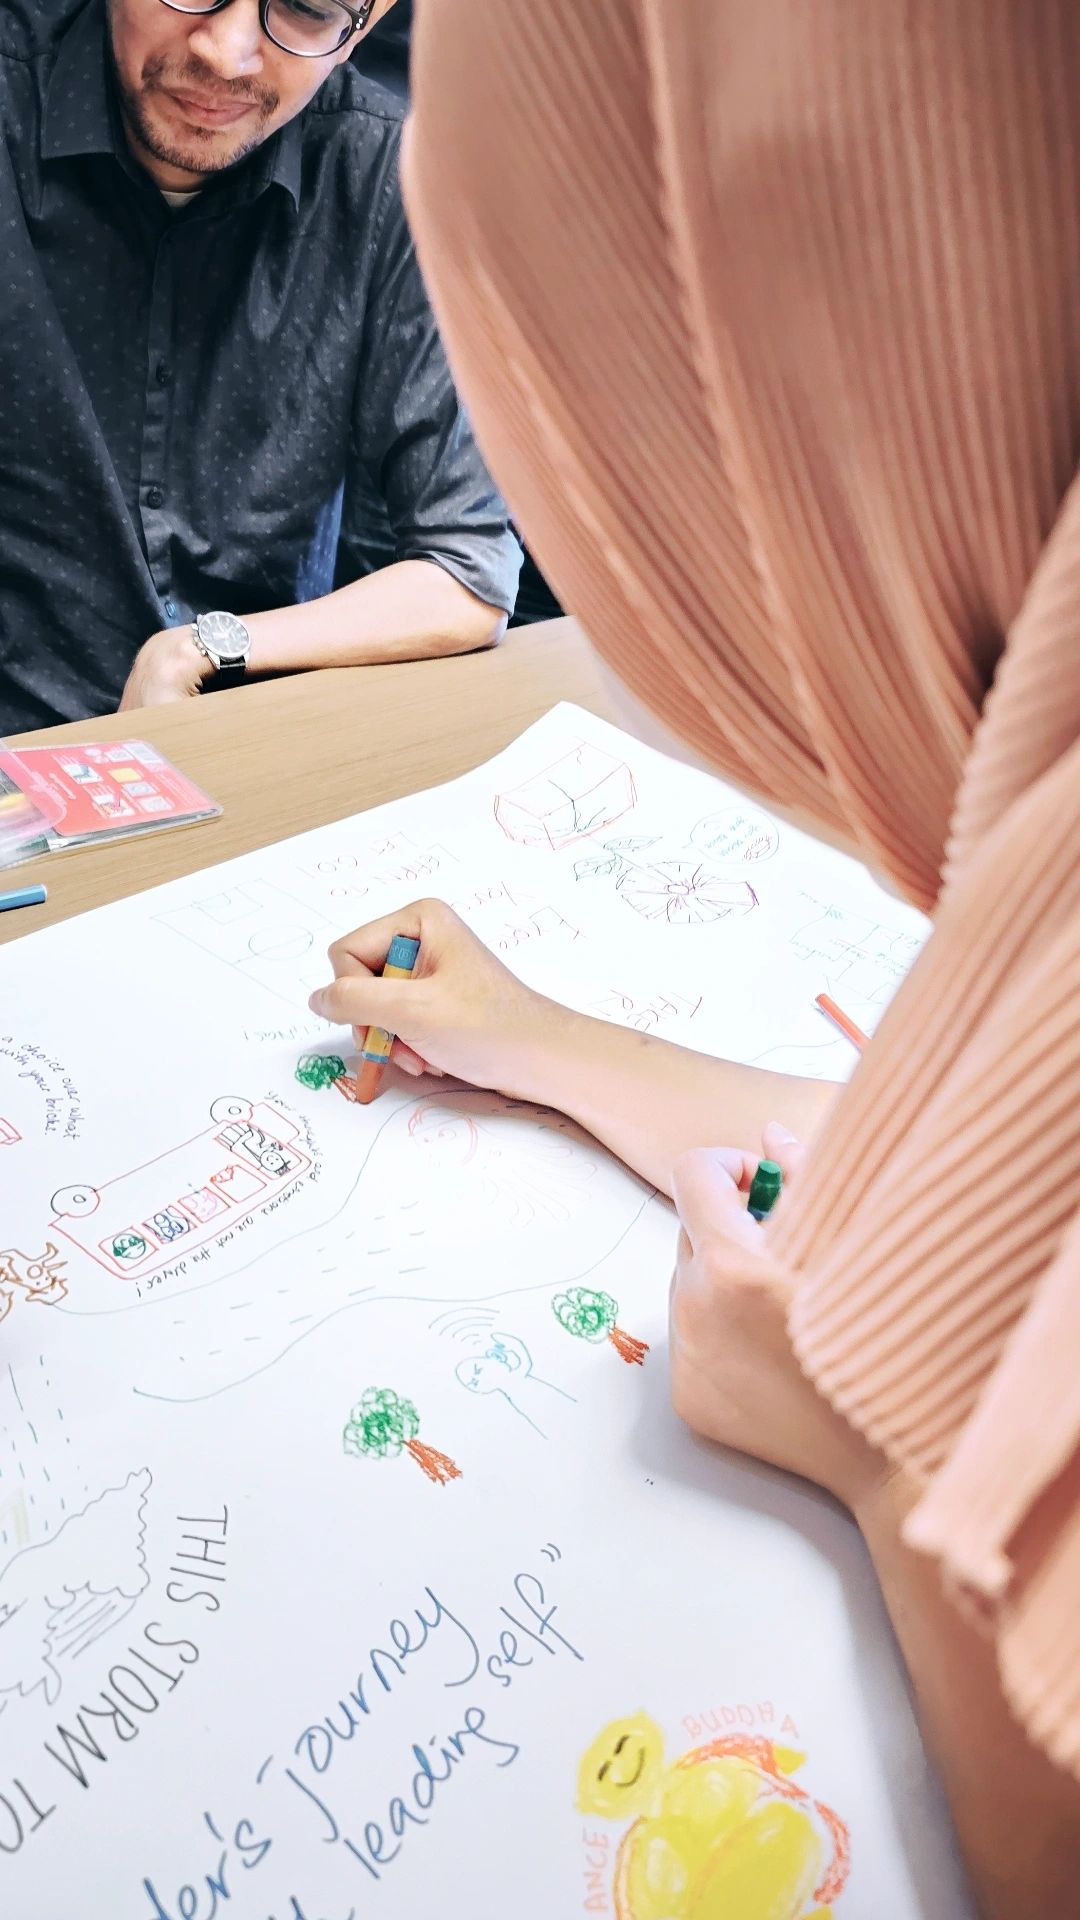 Ayu with her drawing talent